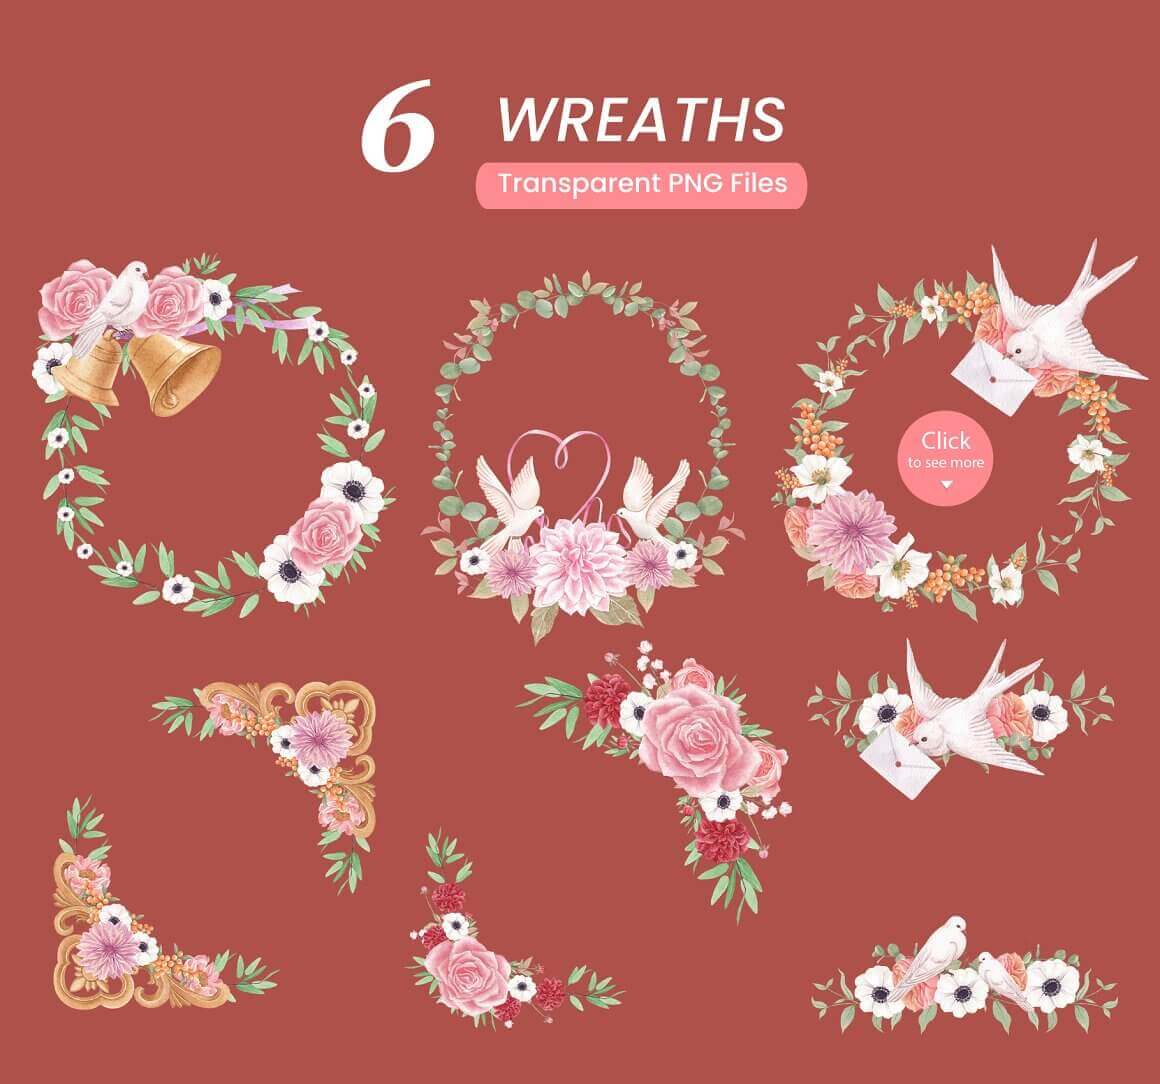 6 Wreaths with Flowers and Leaves.